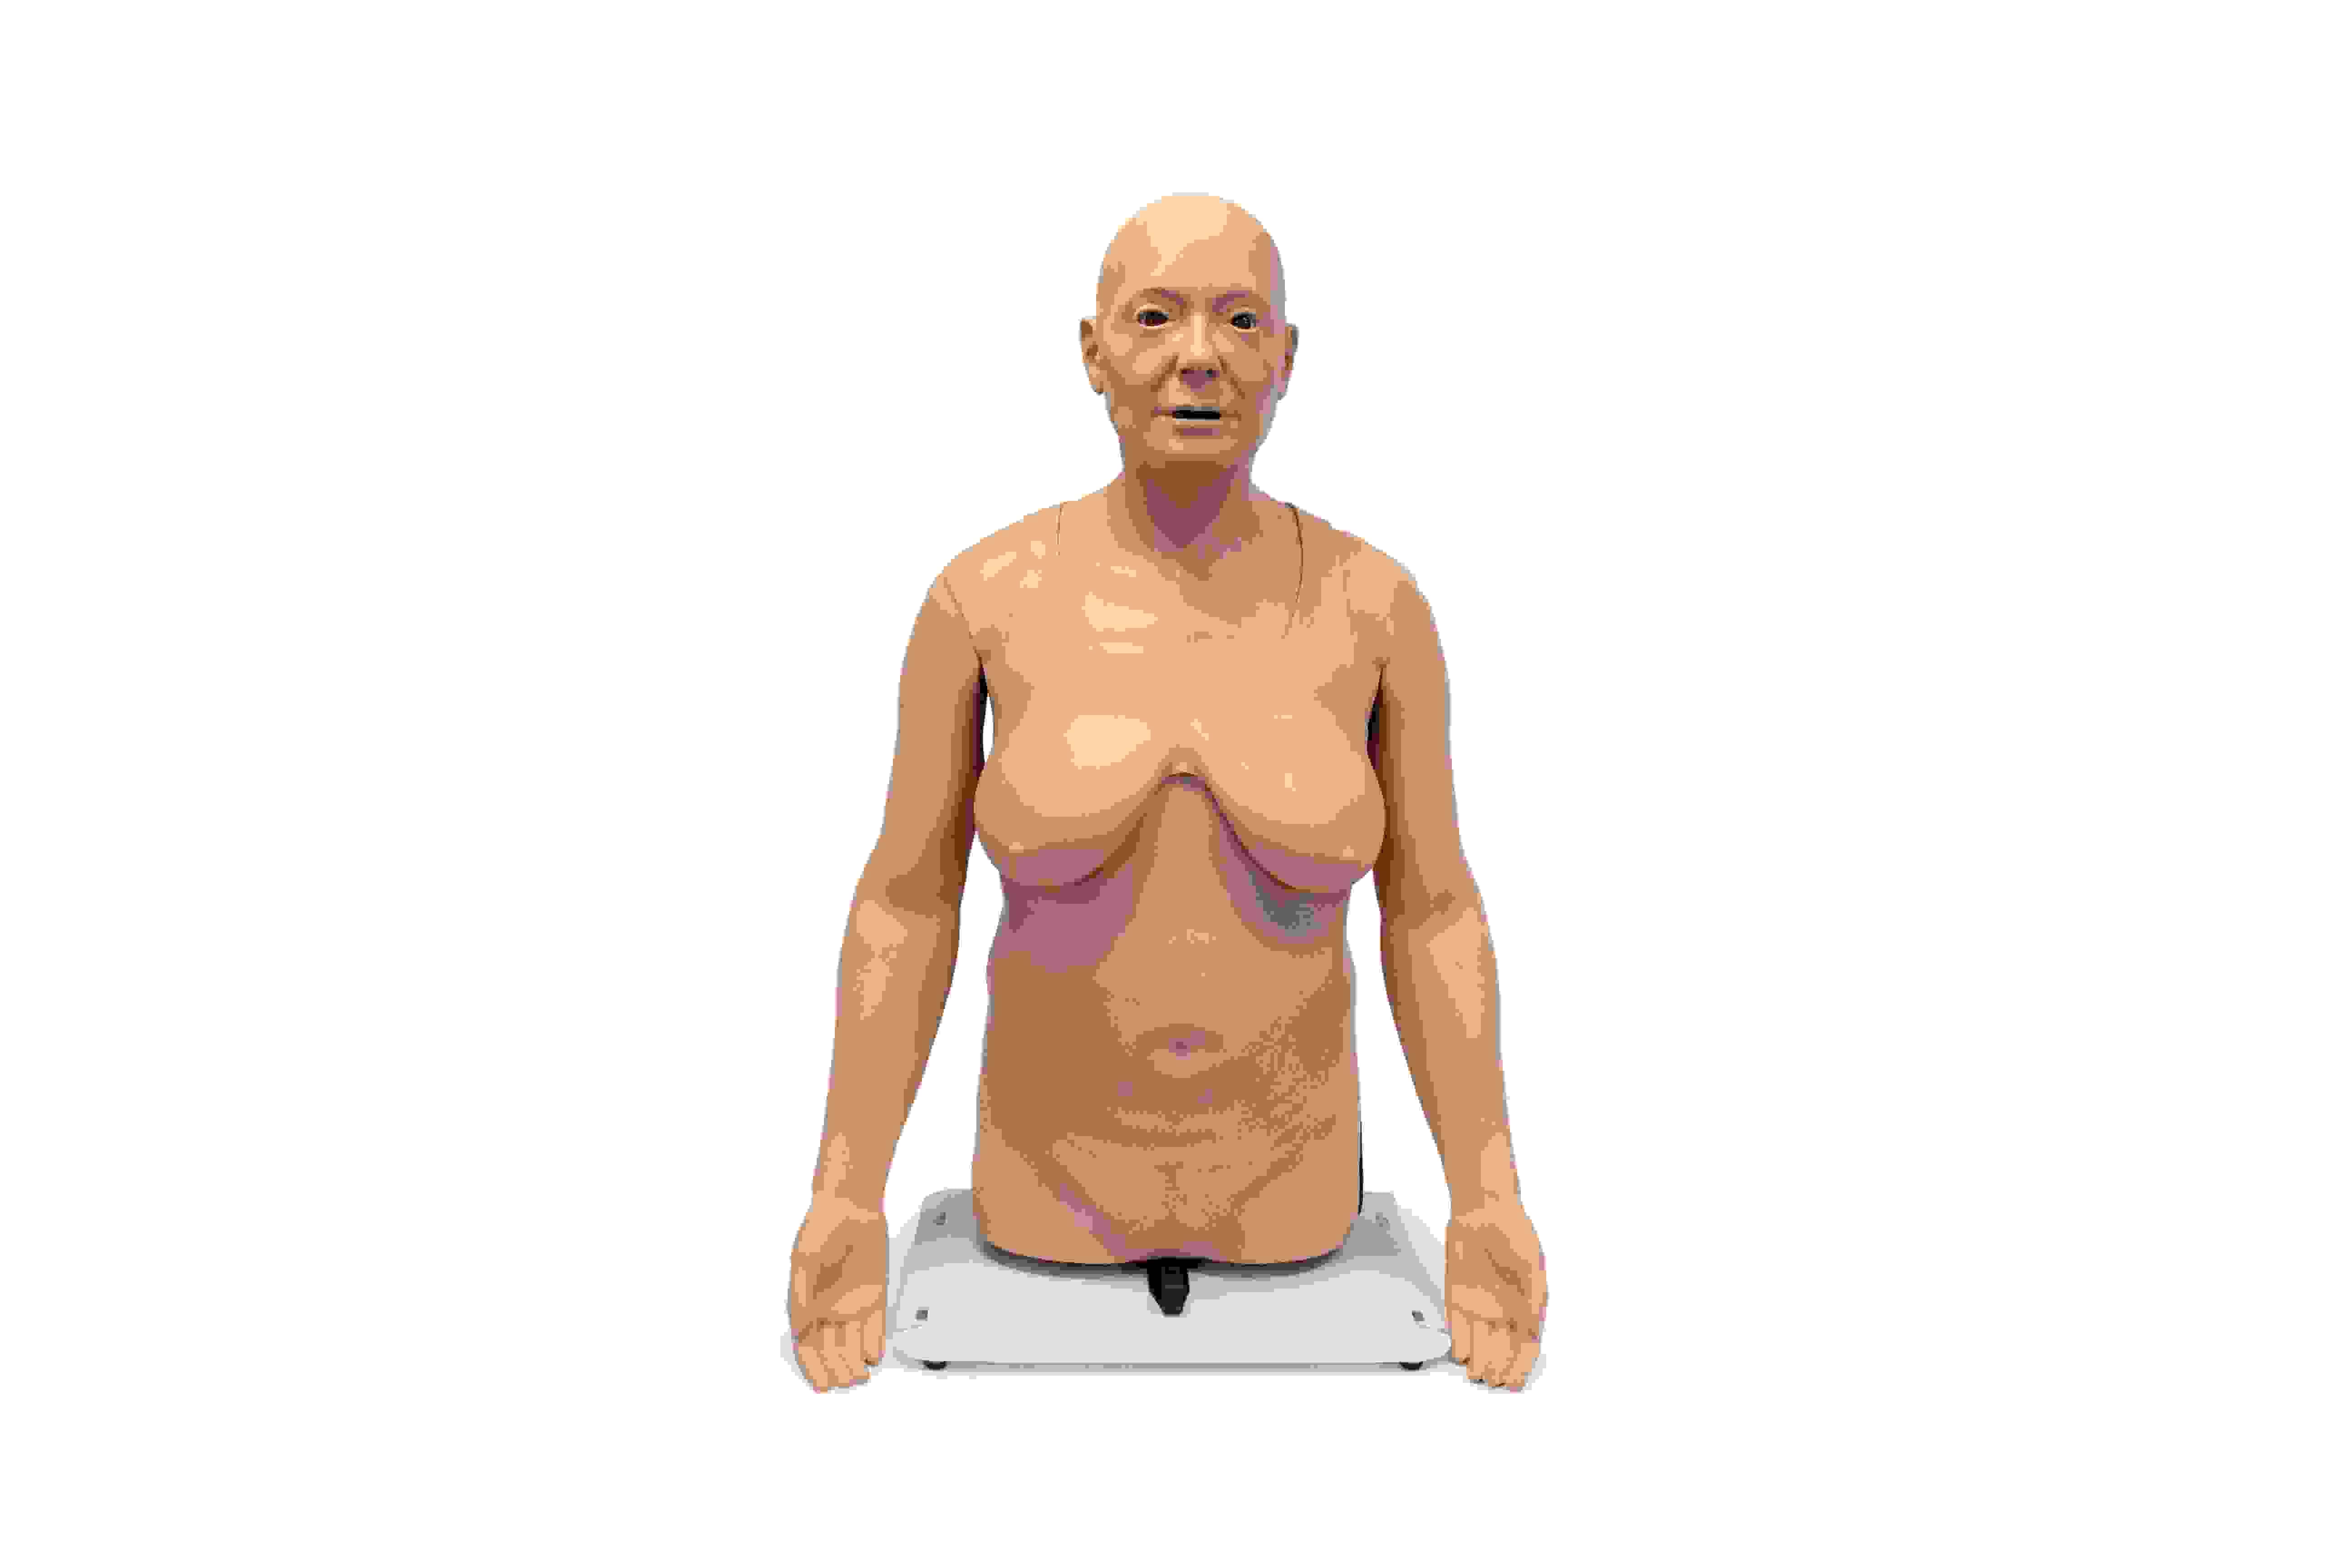 The CaRE trainer with the additional Breast Module for female examination